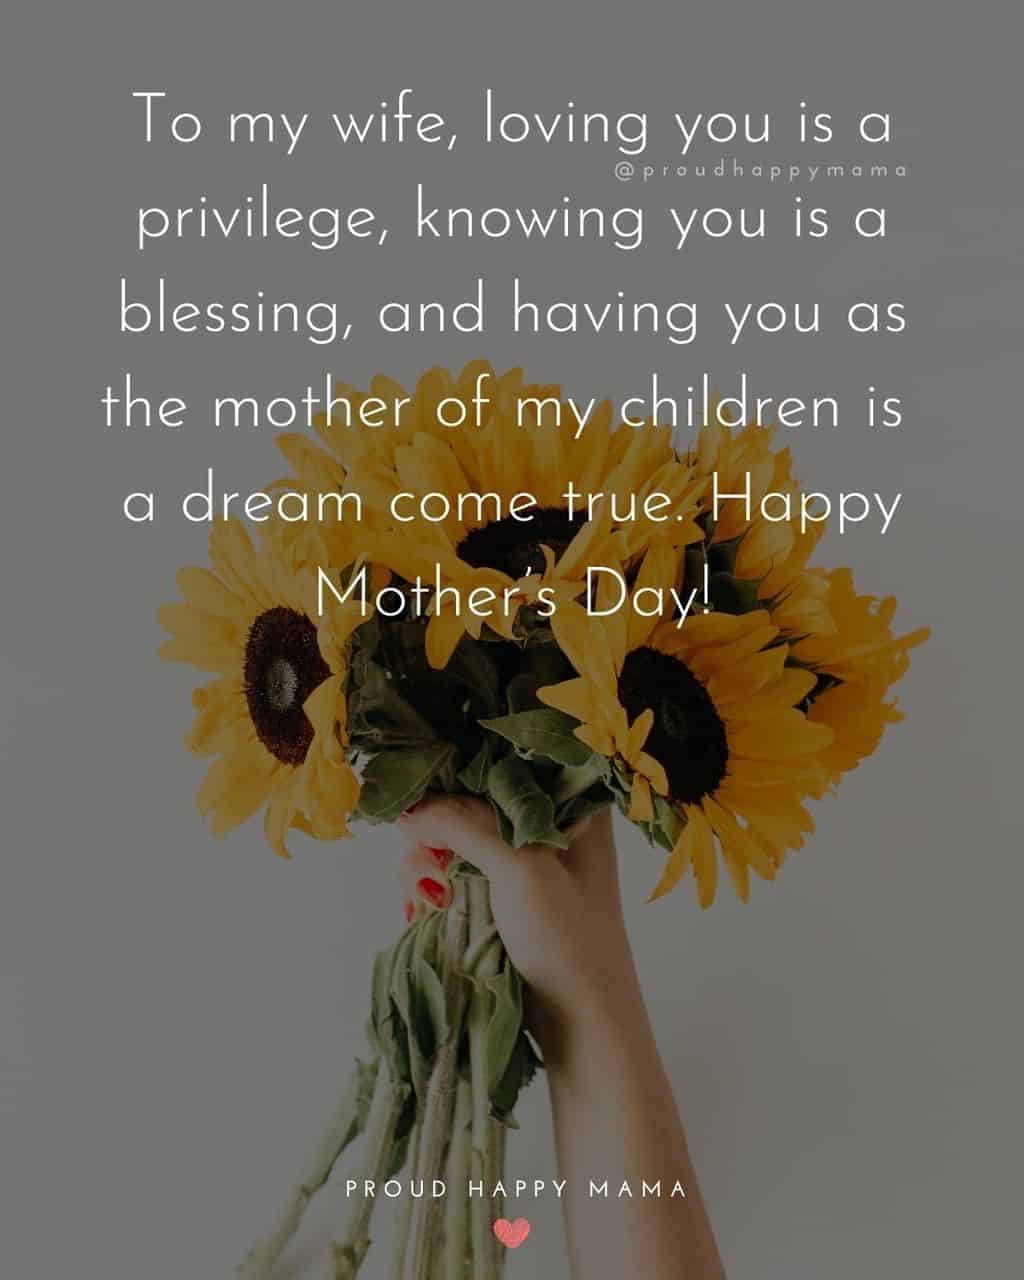 Happy Mothers Day Quotes For Wife - To my wife, loving you is a privilege, knowing you is a blessing, and having you as the